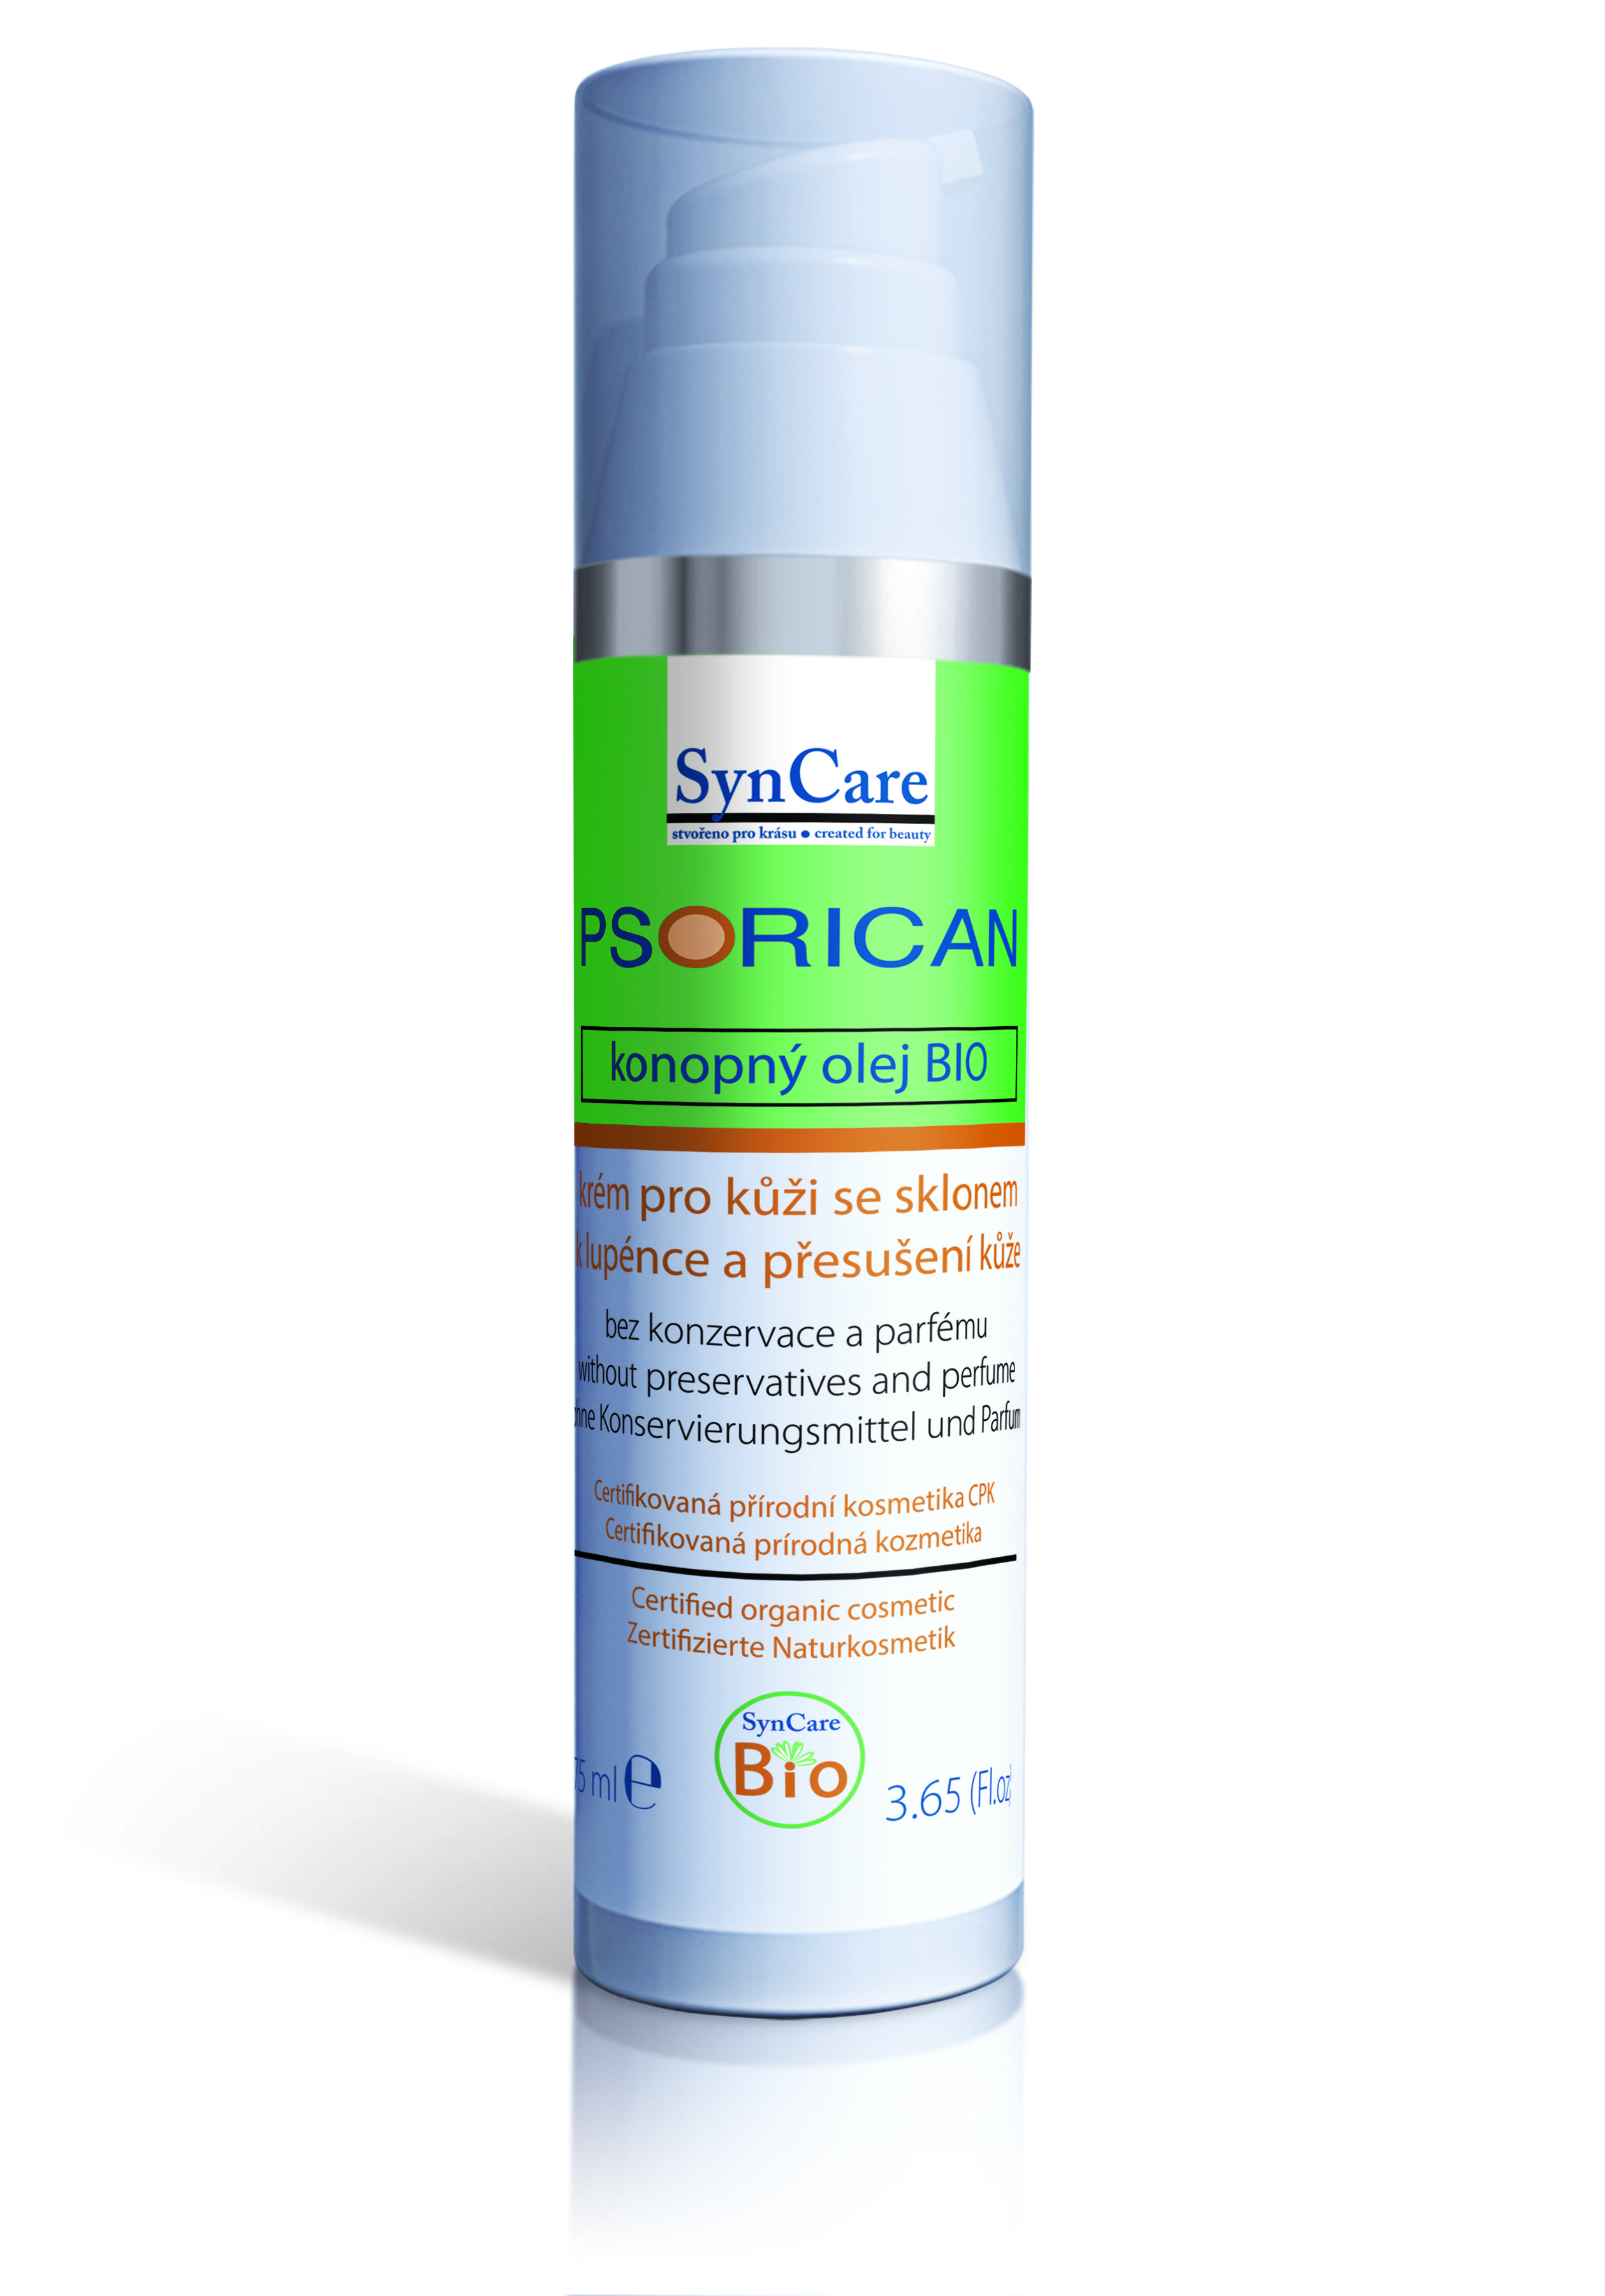 SynCare PSORICAN 75ml